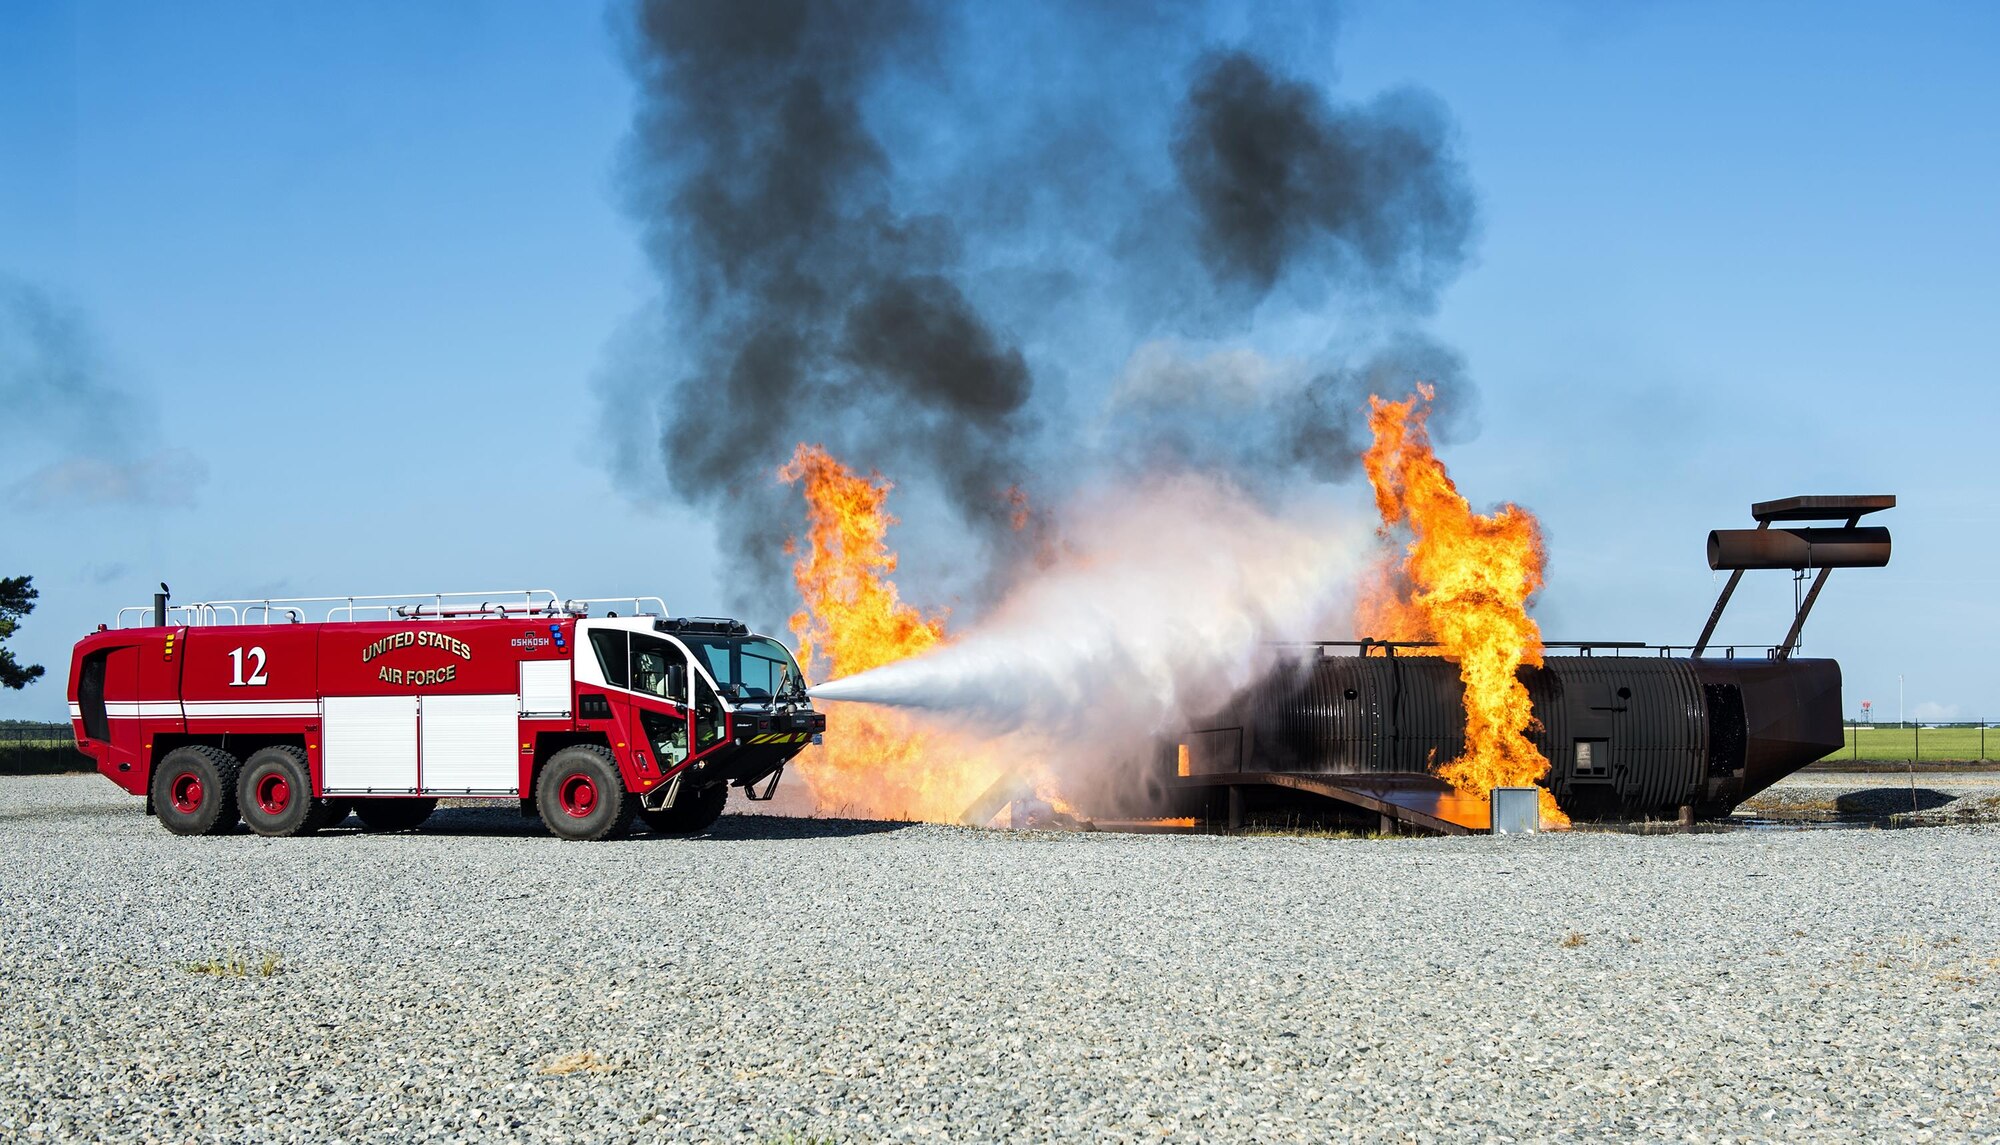 U.S. Air Force firefighters from the 23d Civil Engineer Squadron use a P-23 fire truck to perform exterior firefighting techniques during a joint live fire training exercise, Aug. 24, 2016, at Moody Air Force Base, Ga. Firefighters from Valdosta Regional Airport and the 23d CES teamed up to practice the proper techniques to extinguish a jet fuel fire in case of an aircraft incident. (U.S. Air Force photo by Airman 1st Class Janiqua P. Robinson)